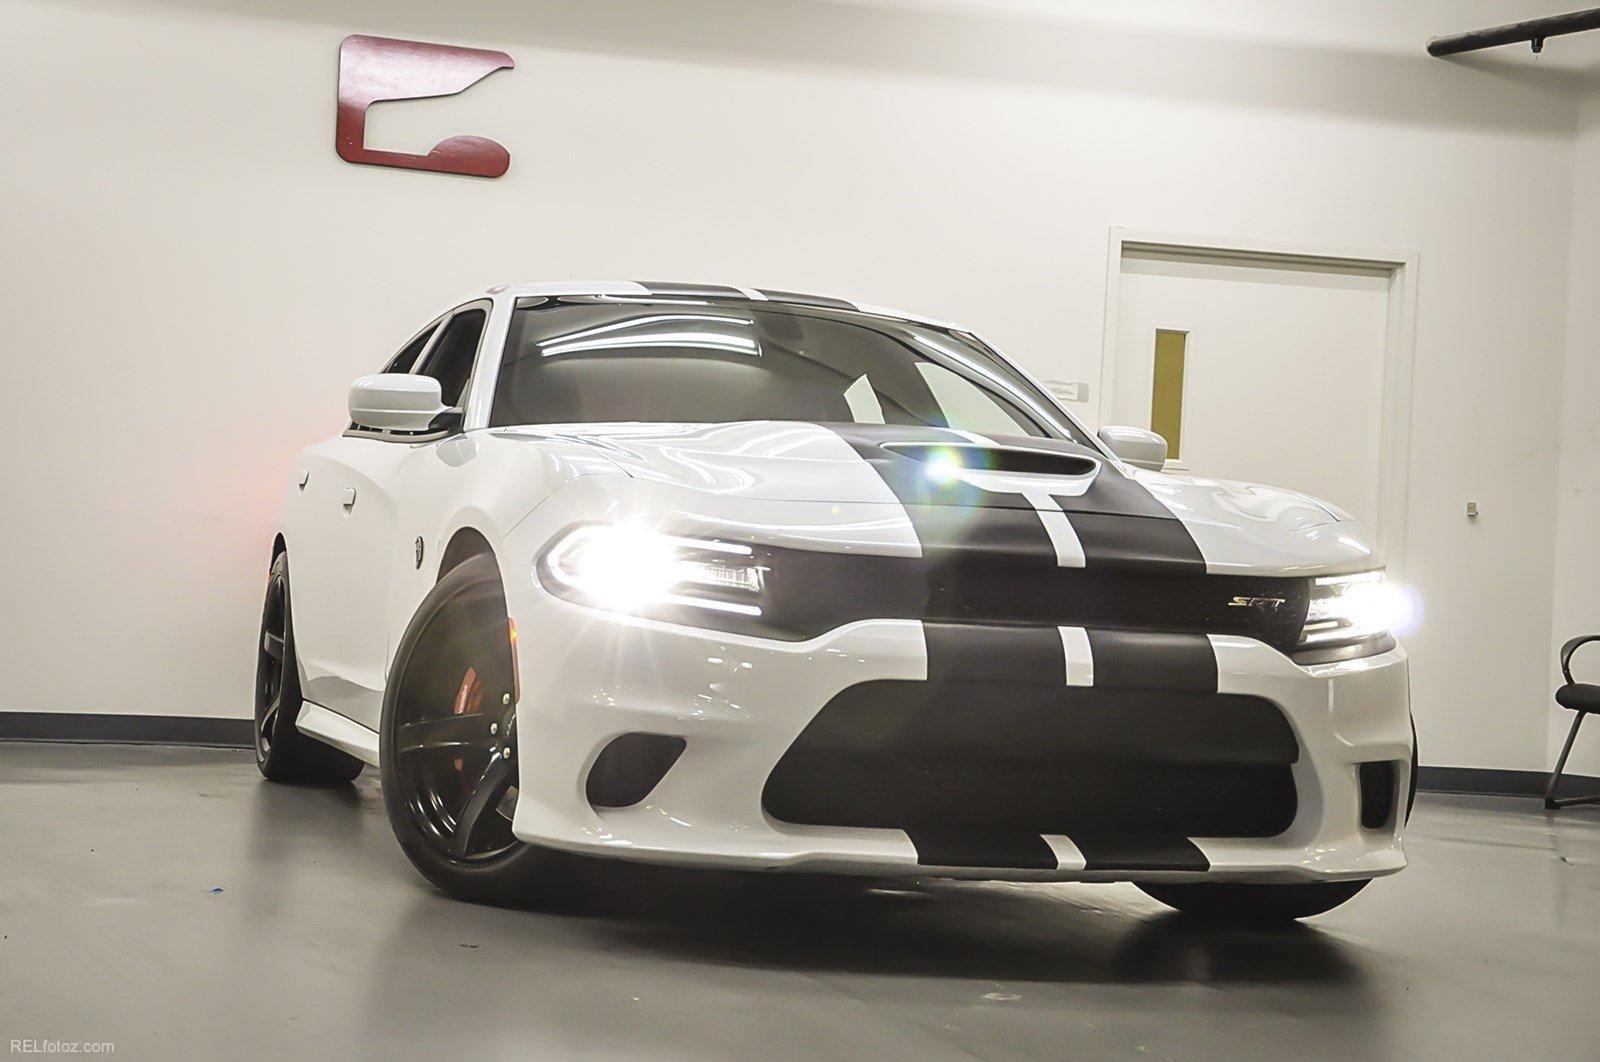 Used 2017 Dodge Charger SRT Hellcat for sale Sold at Gravity Autos Marietta in Marietta GA 30060 2